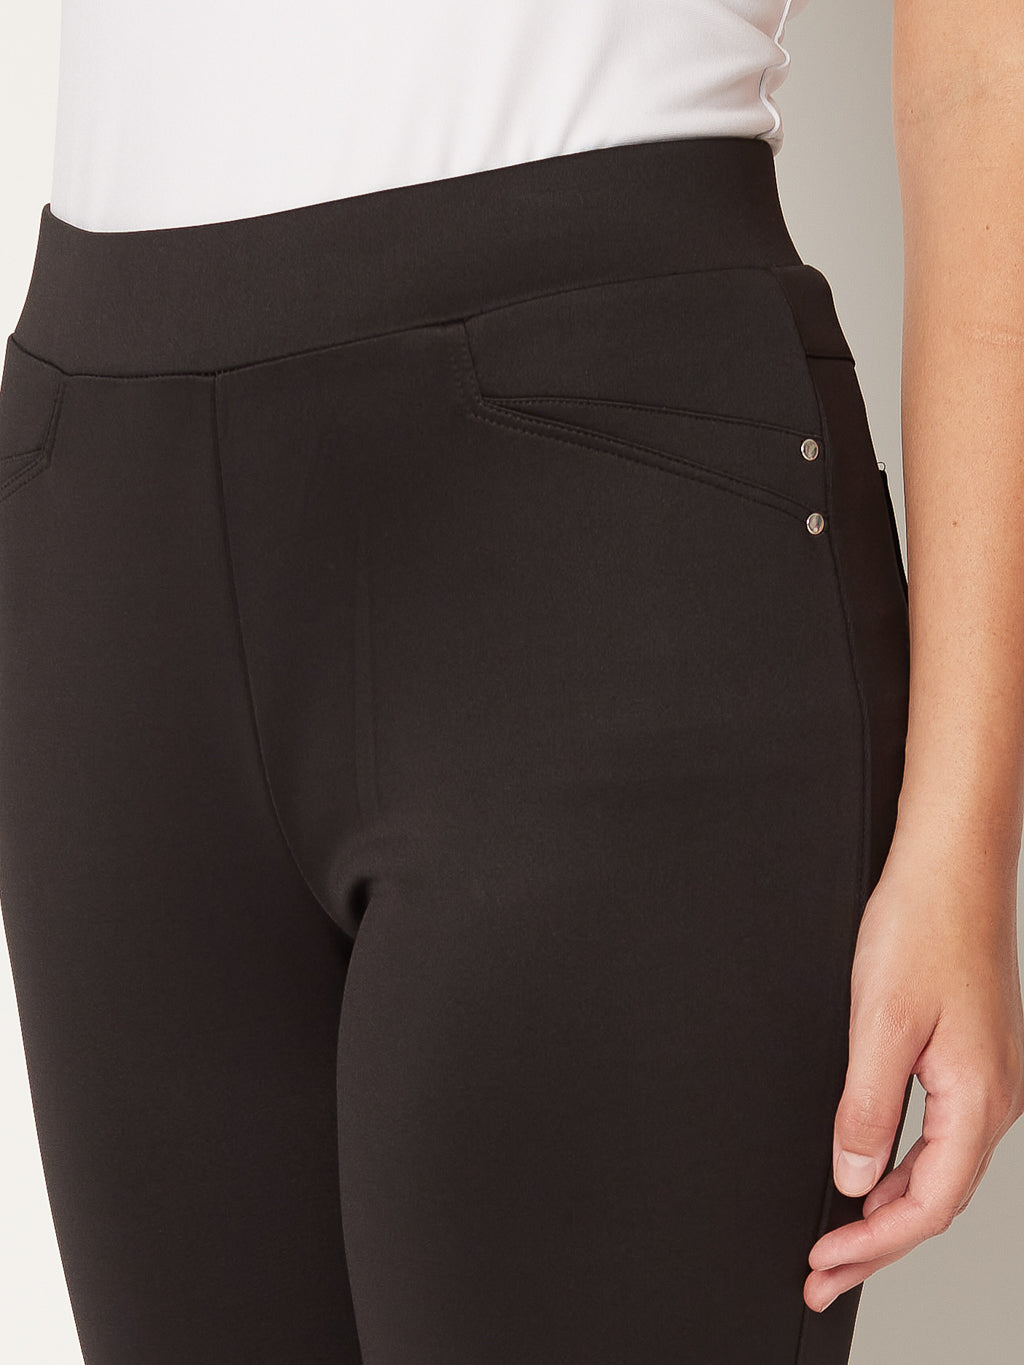 Narrow semi-fitted pull-on pant